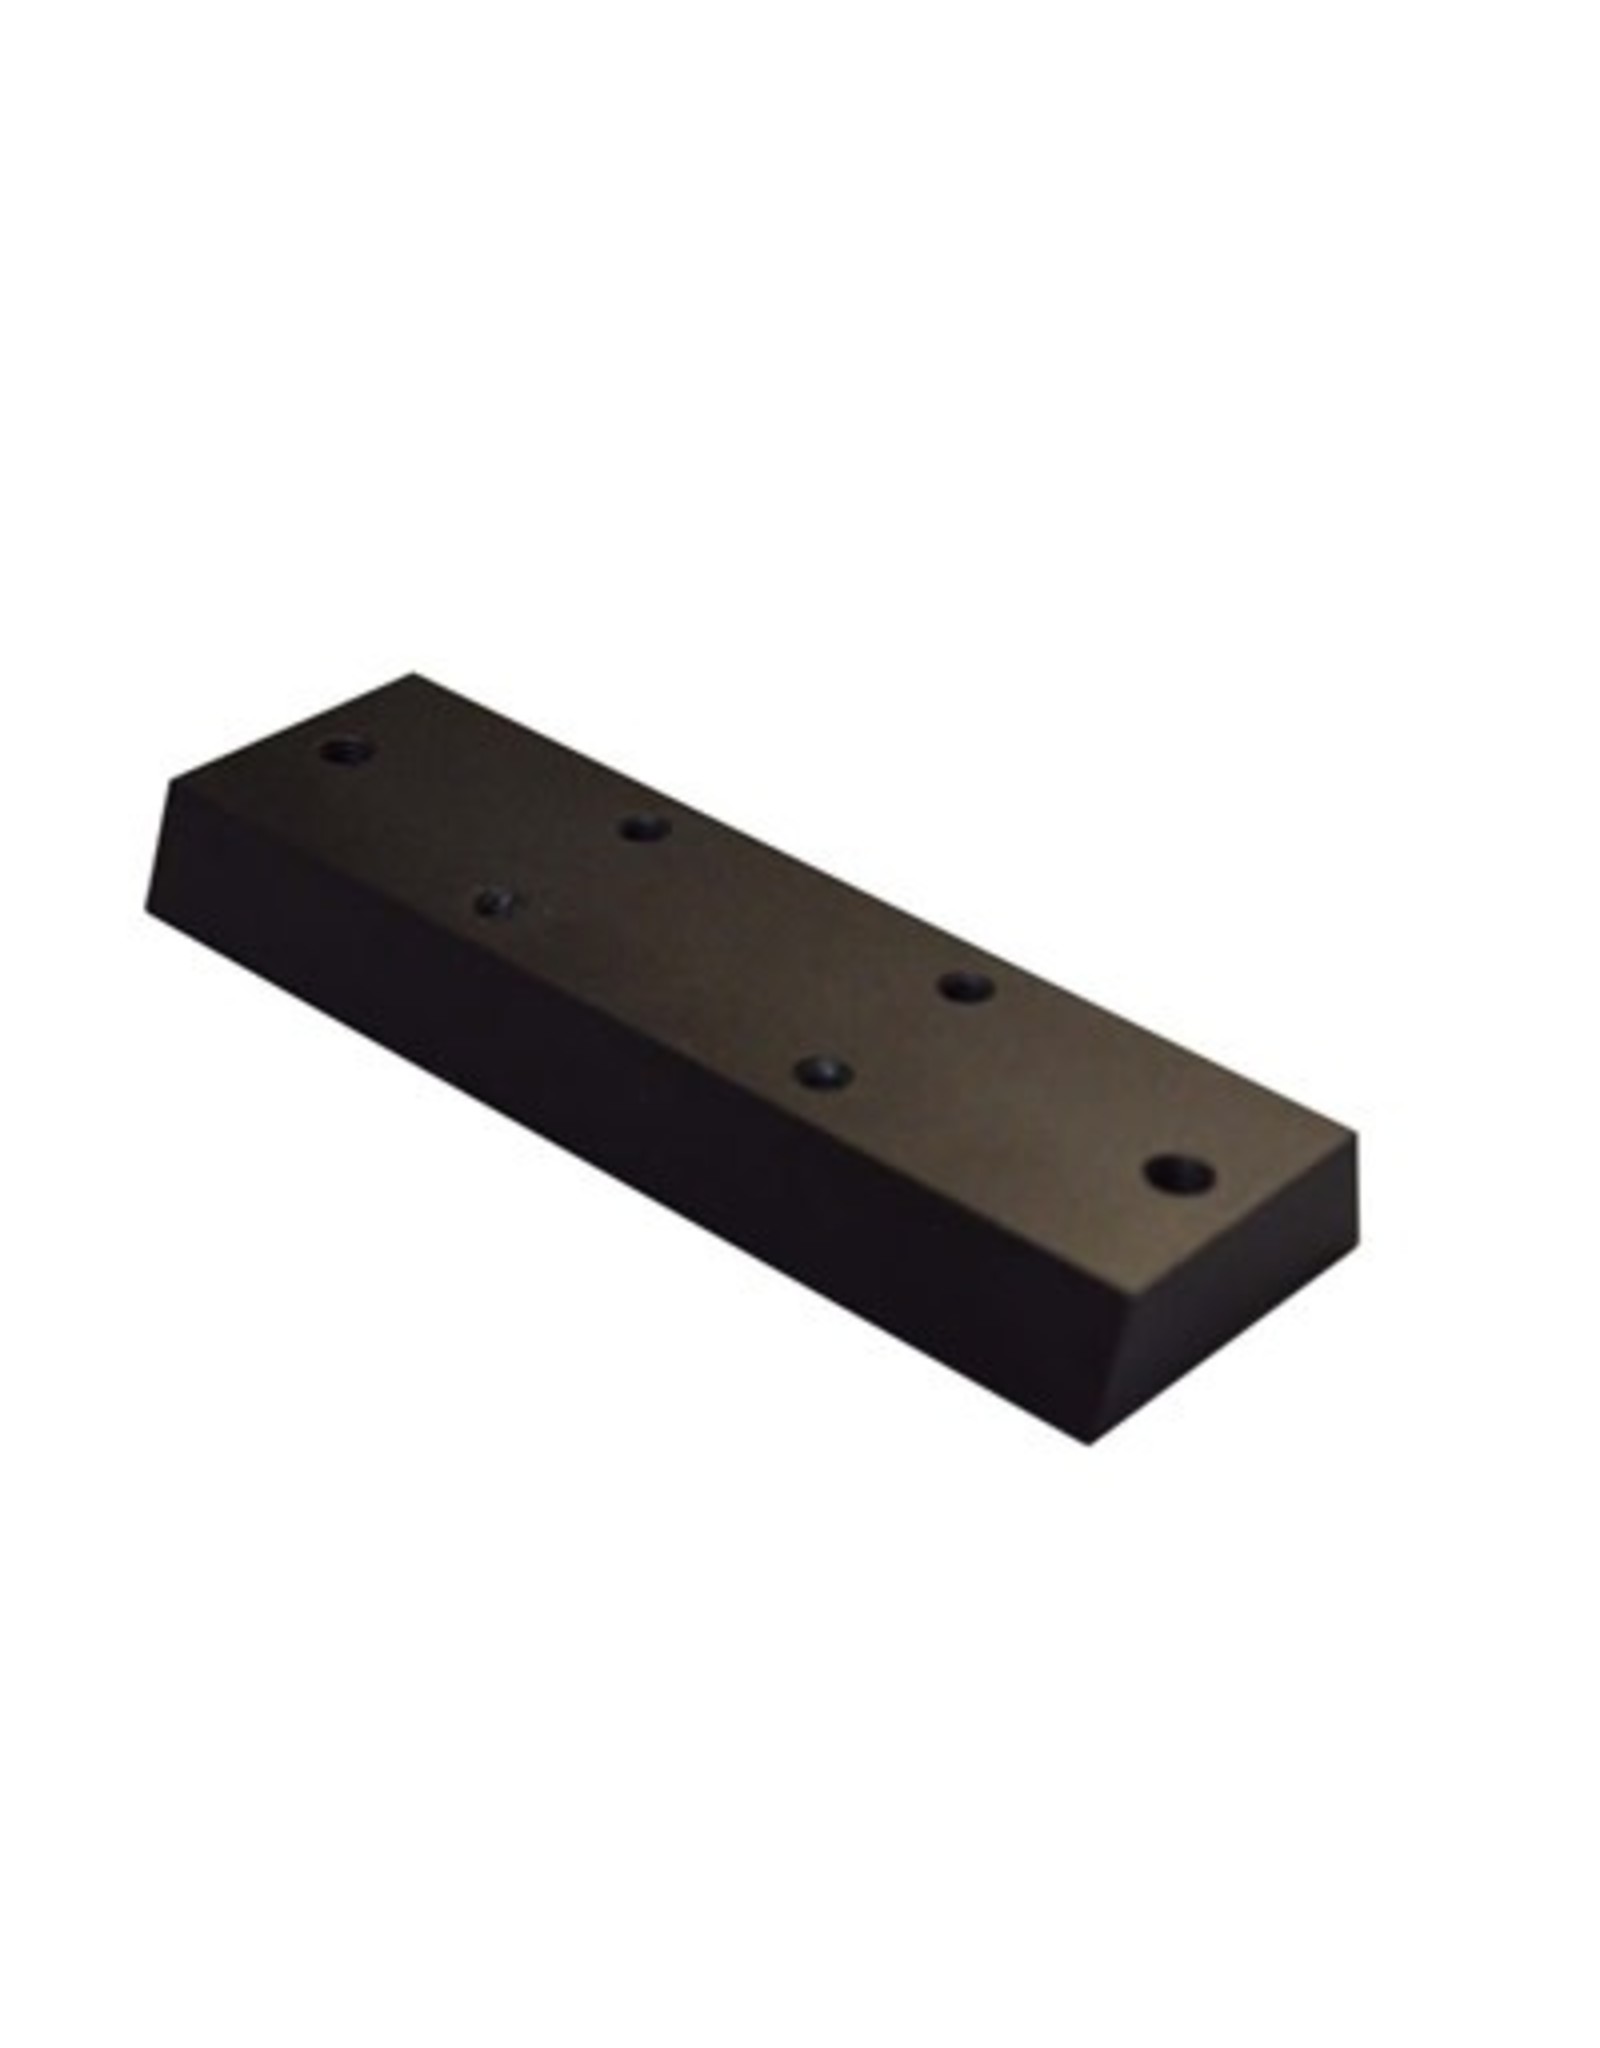 Ioptron Dovetail Plate - designed for iEQ45 dual saddle